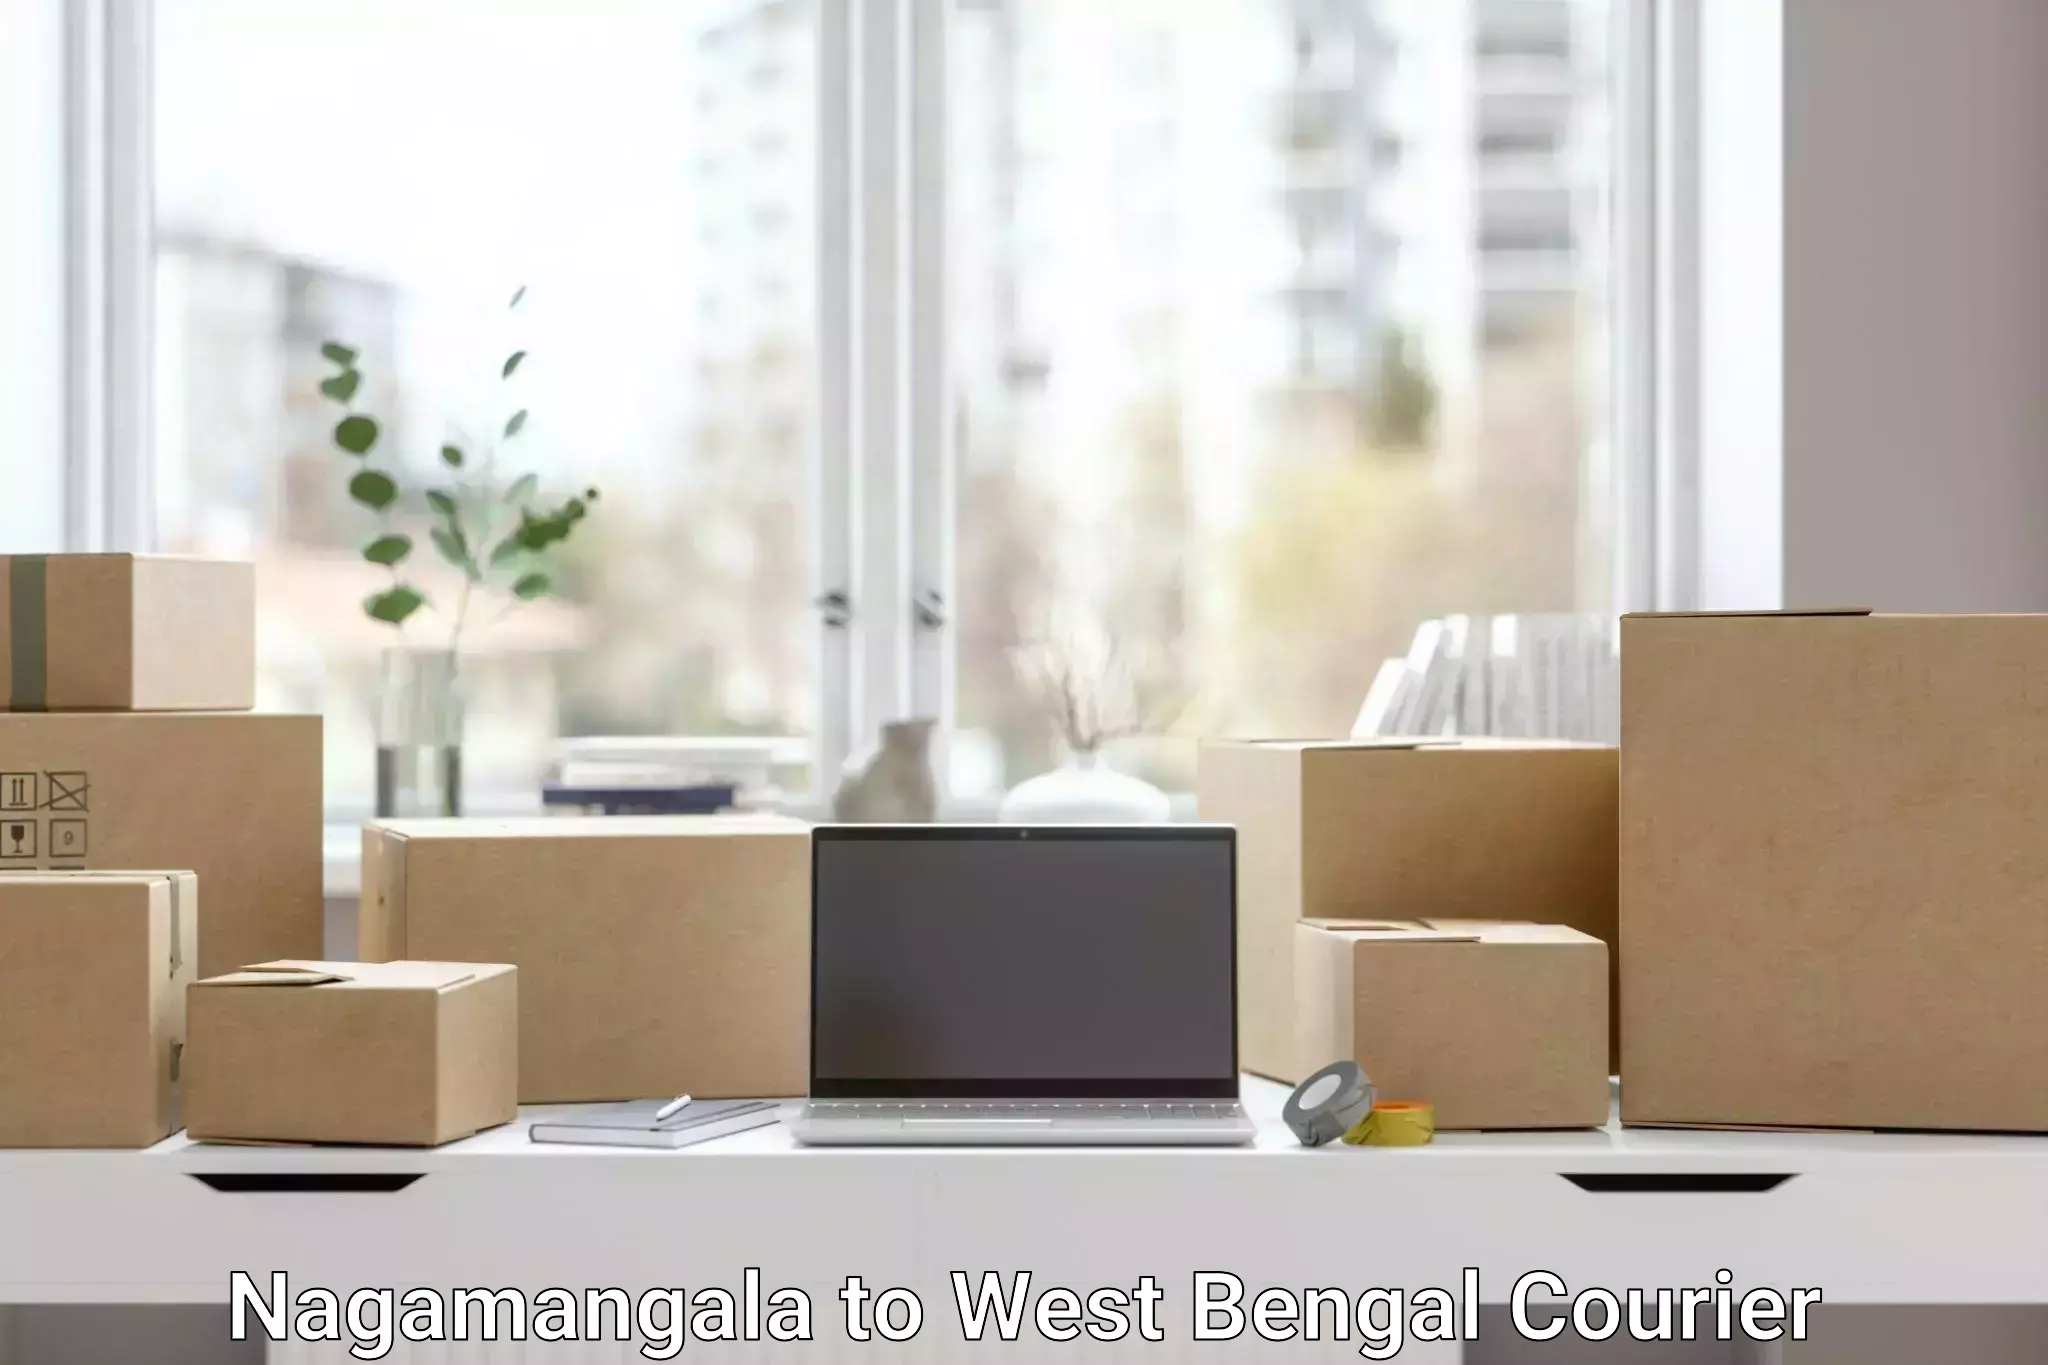 International courier networks Nagamangala to West Bengal